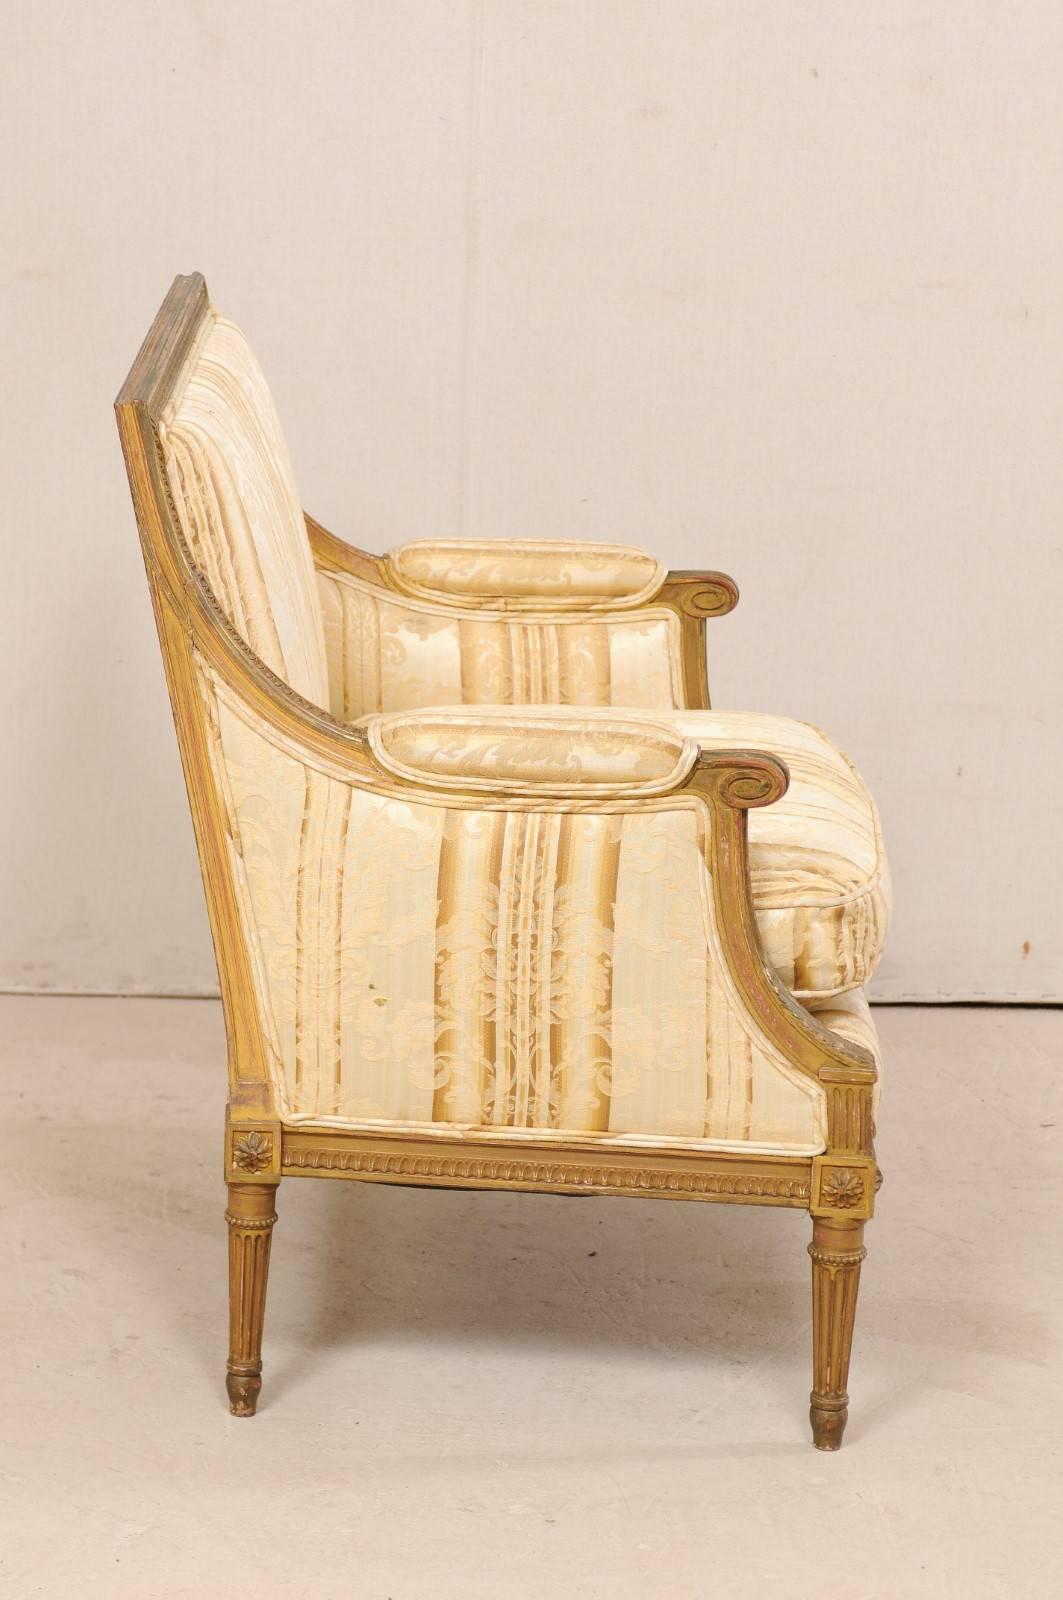 Carved French Louis XVI Style Marquise Late 19th Century Armchair with Wide Seat